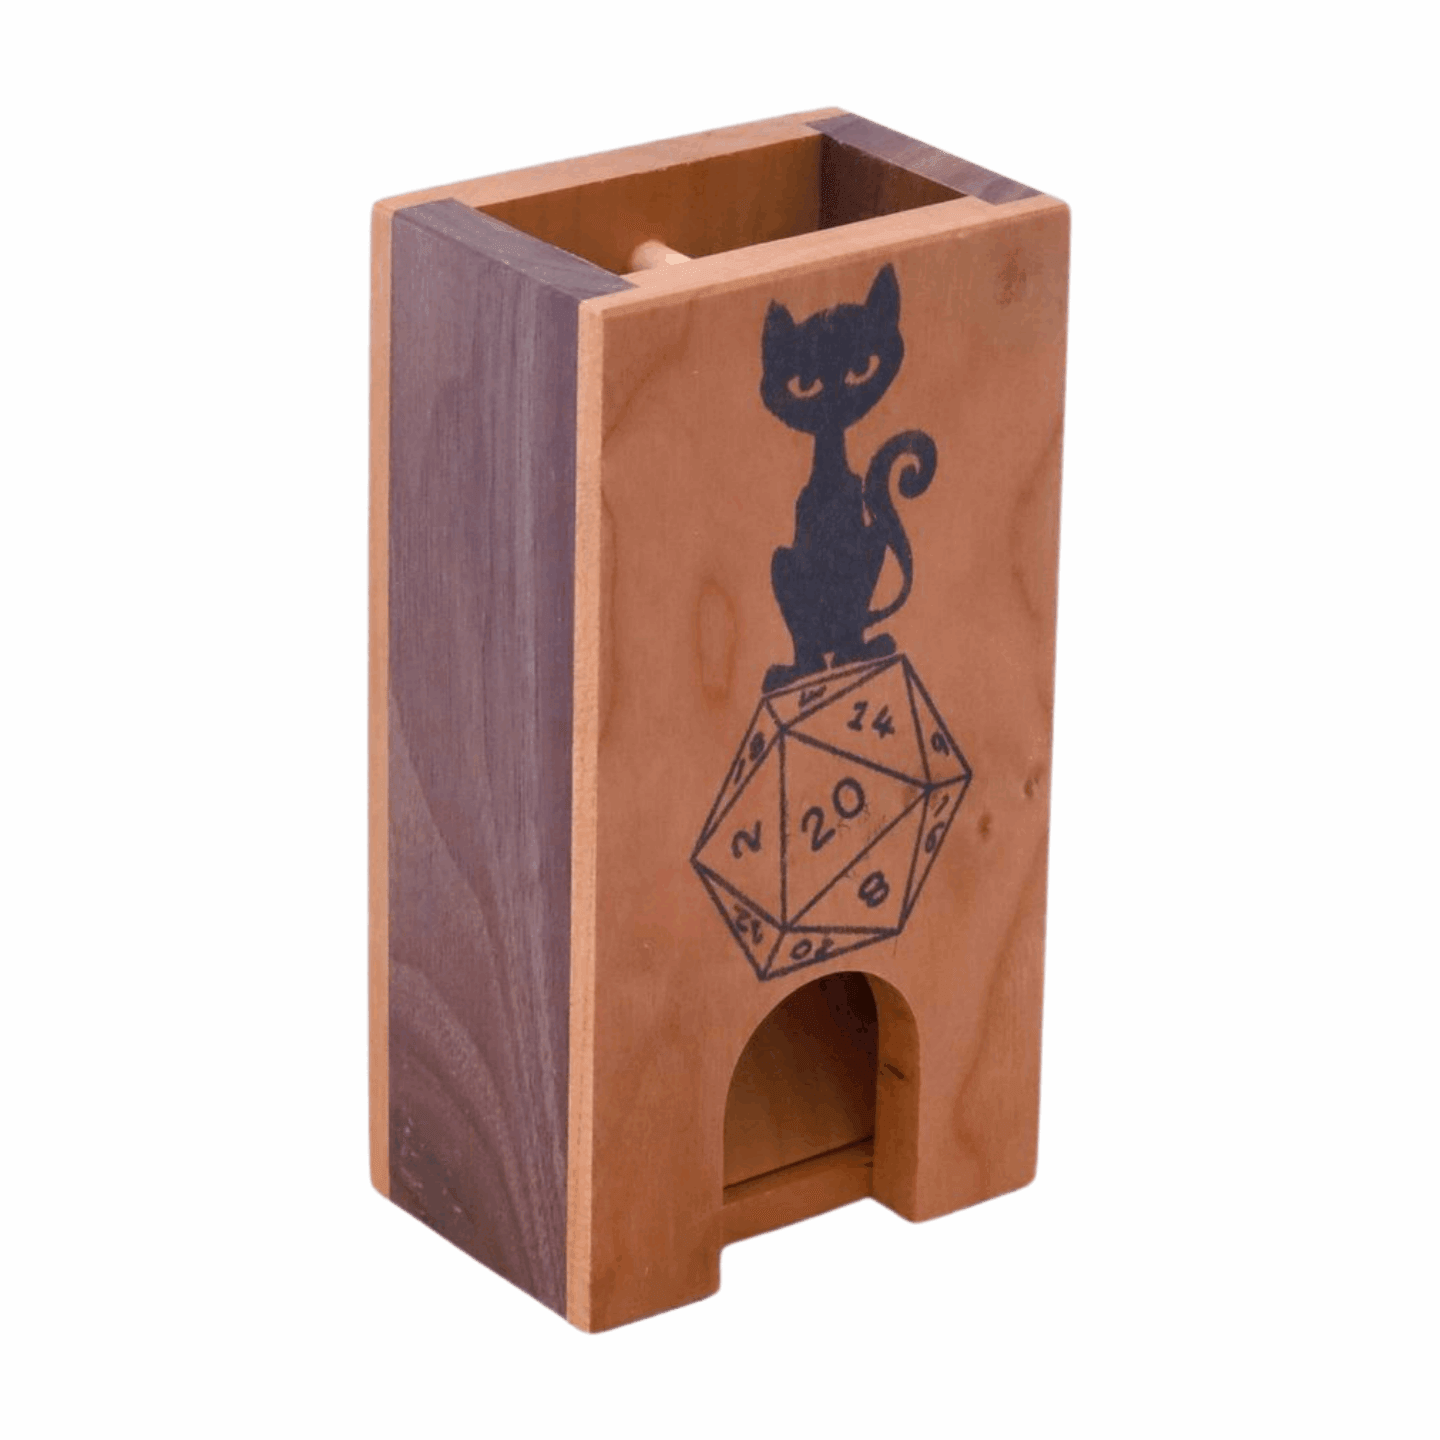 Black Cat D20 Cute Dice Tower Wood, Witchy Gift for Gamer Girl, Portable Wooden Dice Roller for DnD, Pathfinder, TTRPG, Cozy Gaming Setup- Dragon Armor Games